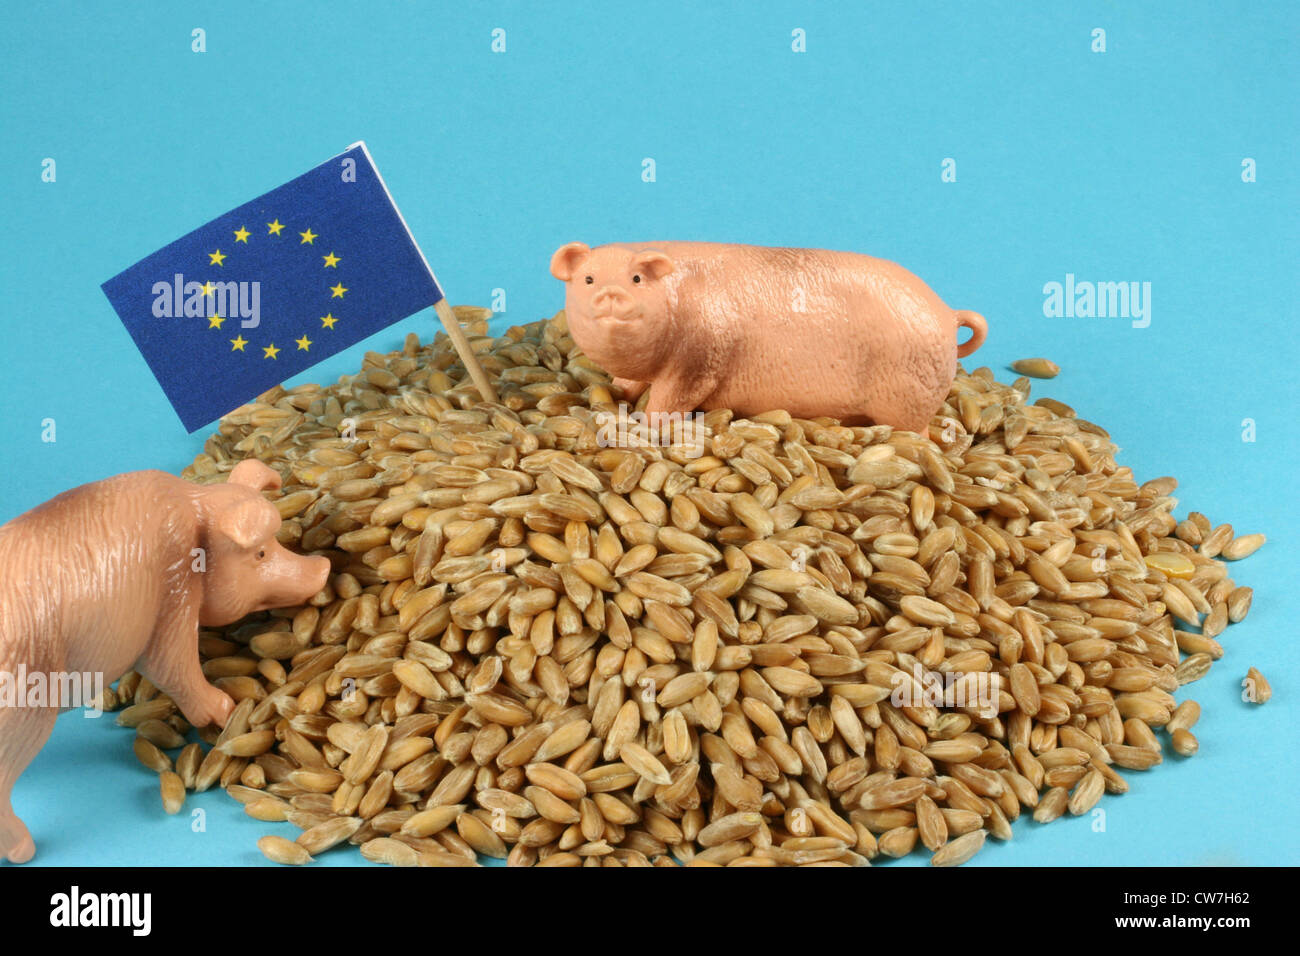 symbolic picture for agrarian subvention, the euro sign with pigs Stock Photo